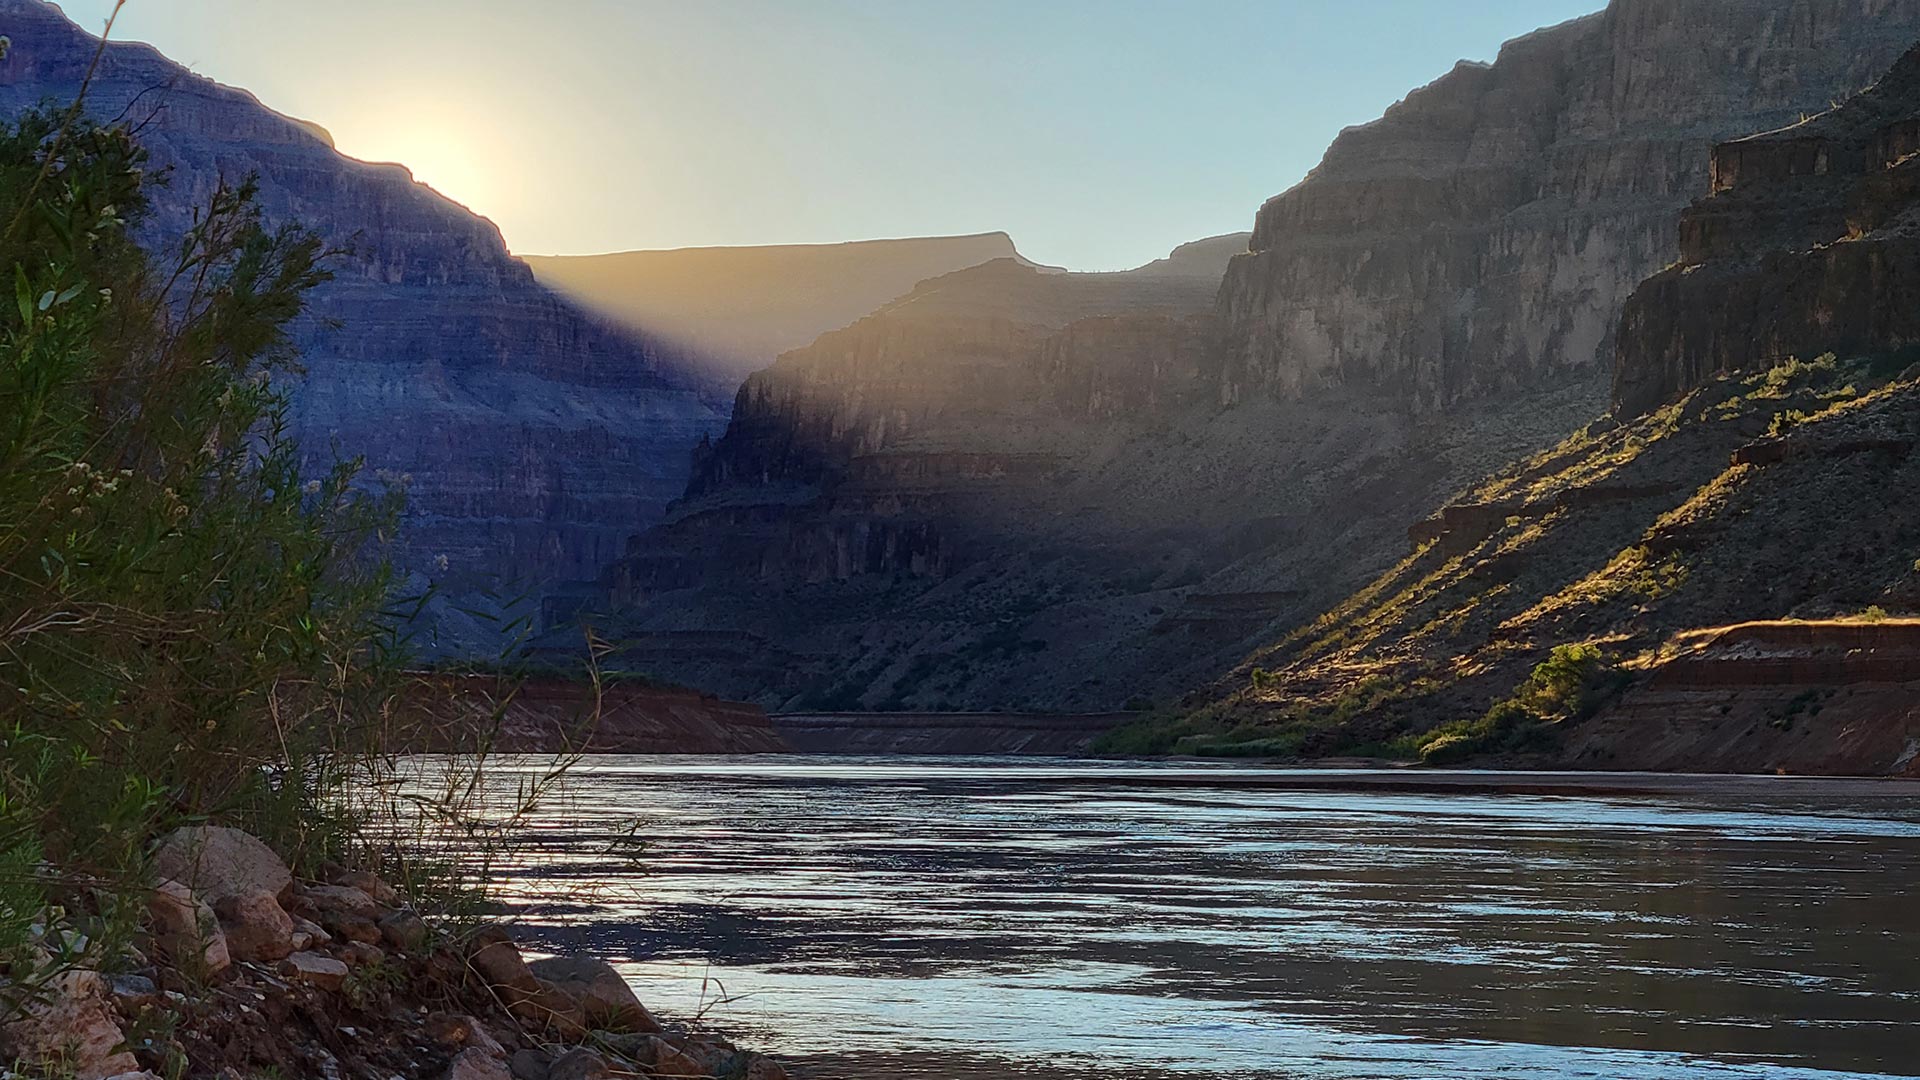 The sun rises over the Colorado River in the Grand Canyon.